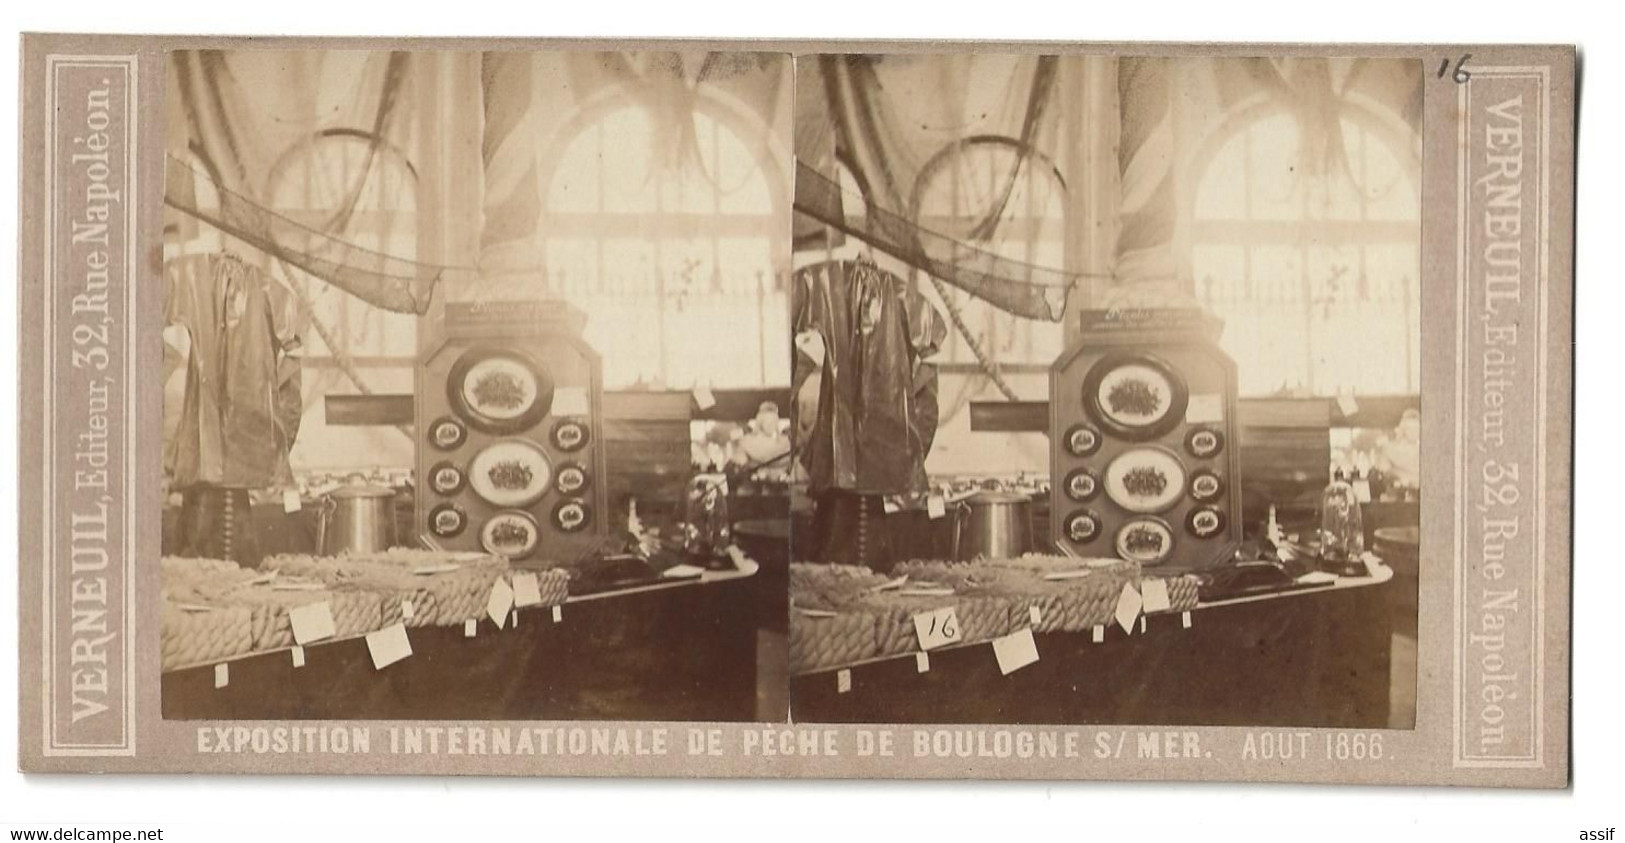 1866 BOULOGNE SUR MER EXPOSITION INTERNATIONALE DE PECHE PHOTO STEREO AUGUSTE VERNEUIL N°16 /FREE SHIPPING REGISTERED - Stereo-Photographie